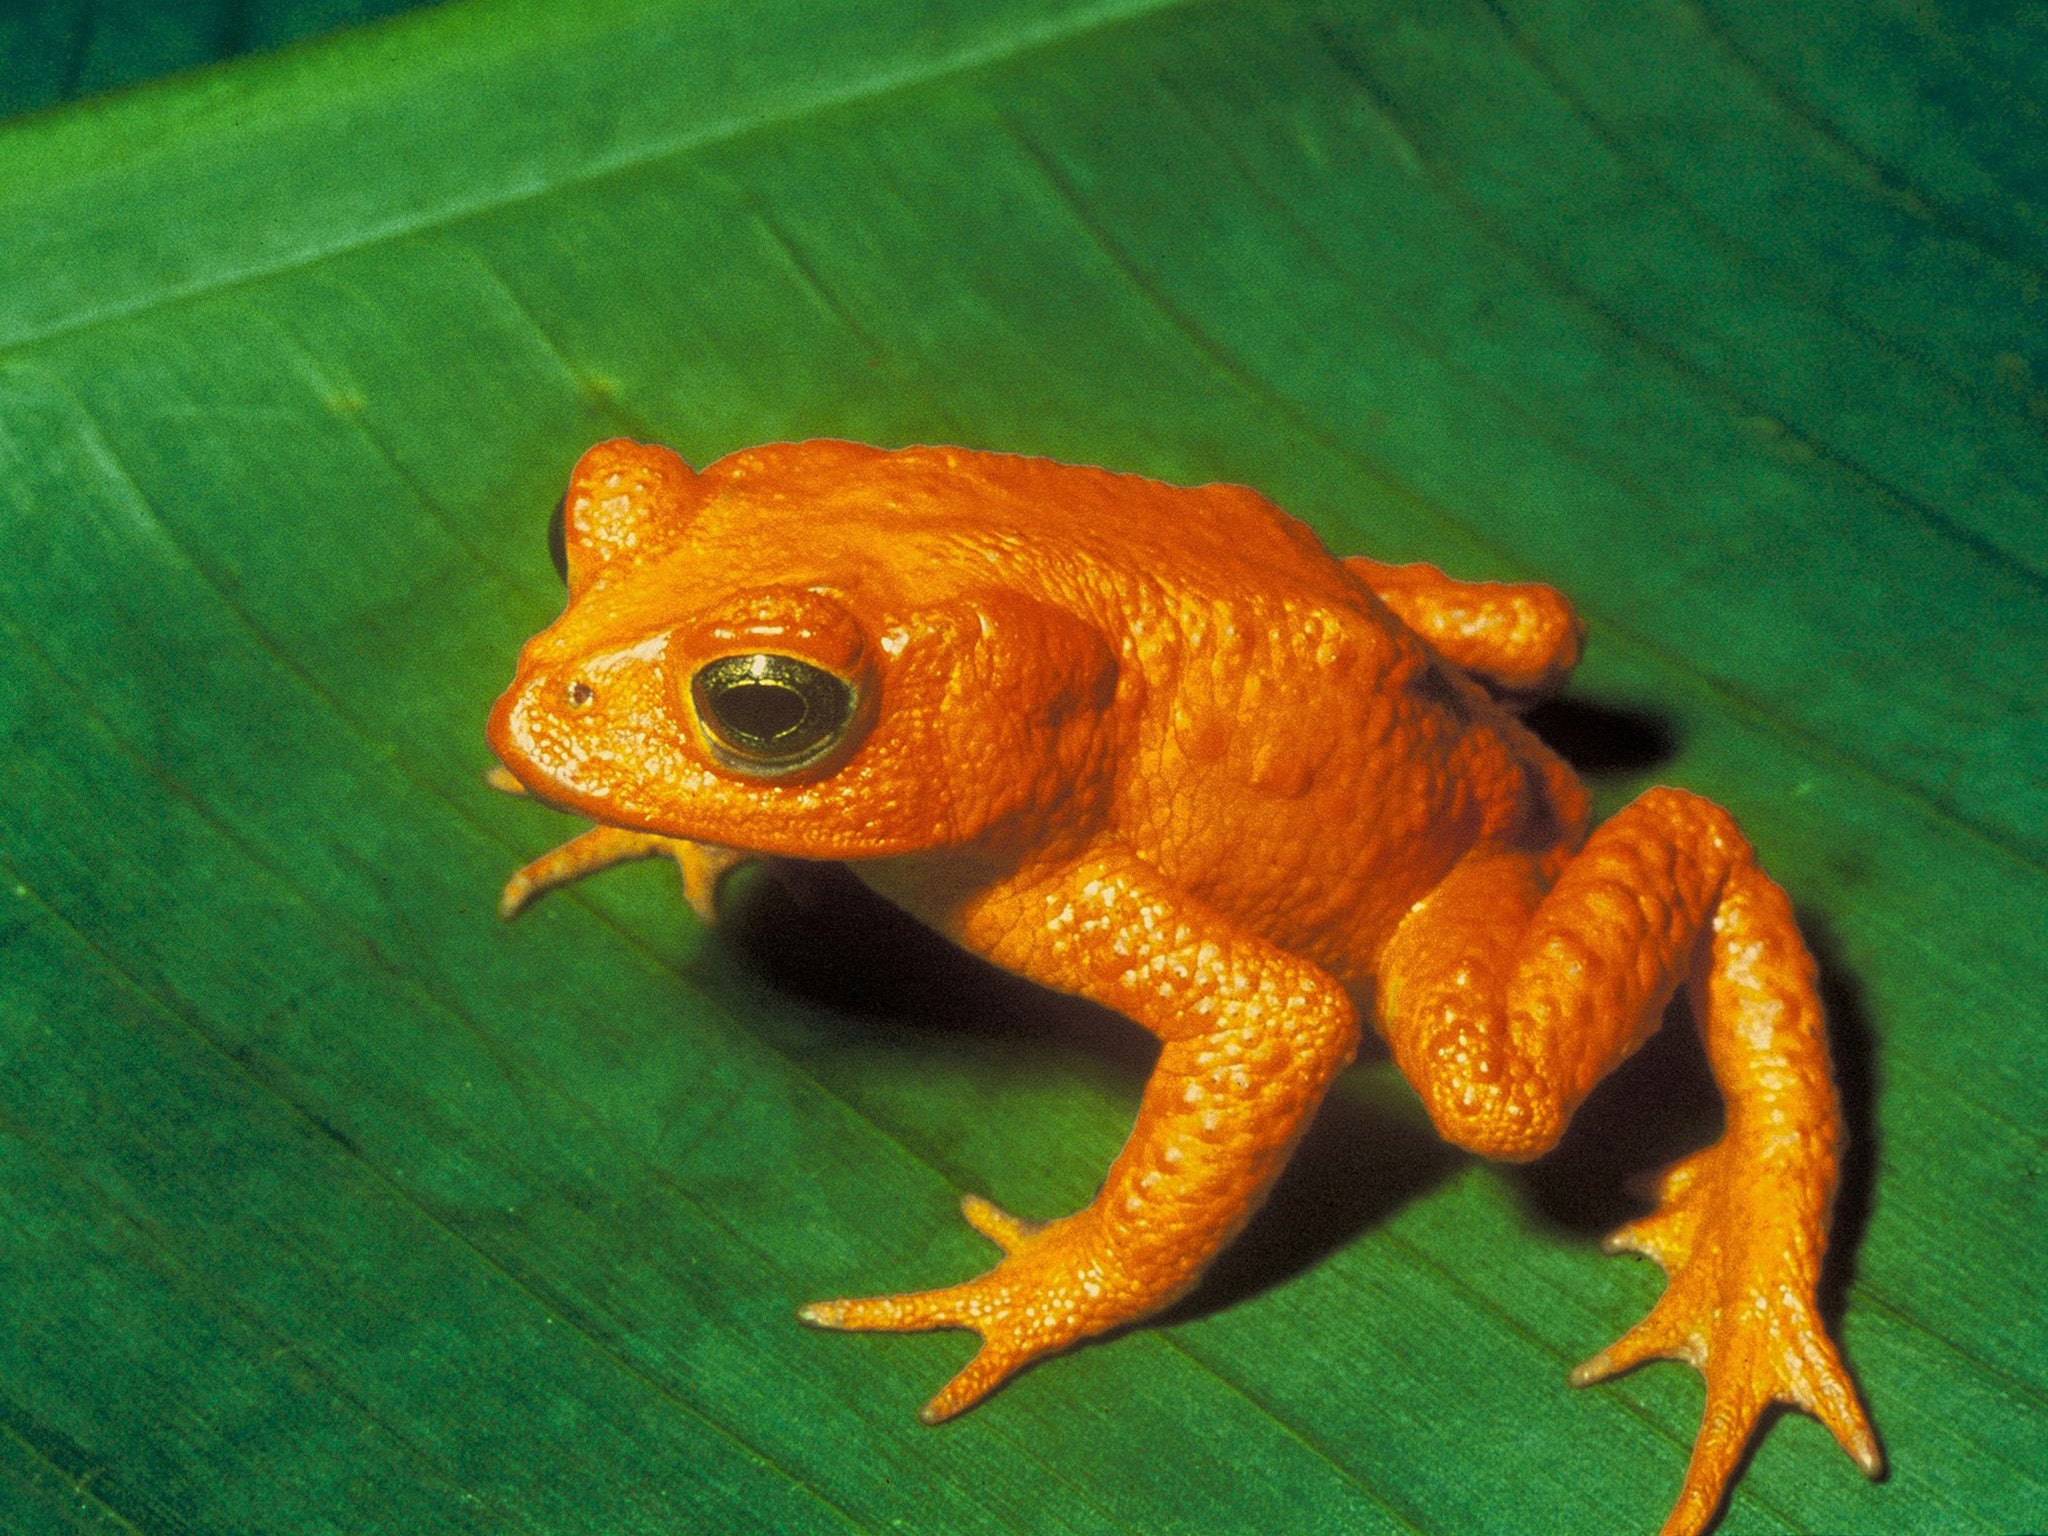 The golden toad of Costa Rica (Incilius periglenes) is now considered to be extinct after it was last seen in the cloud forest of Monteverde